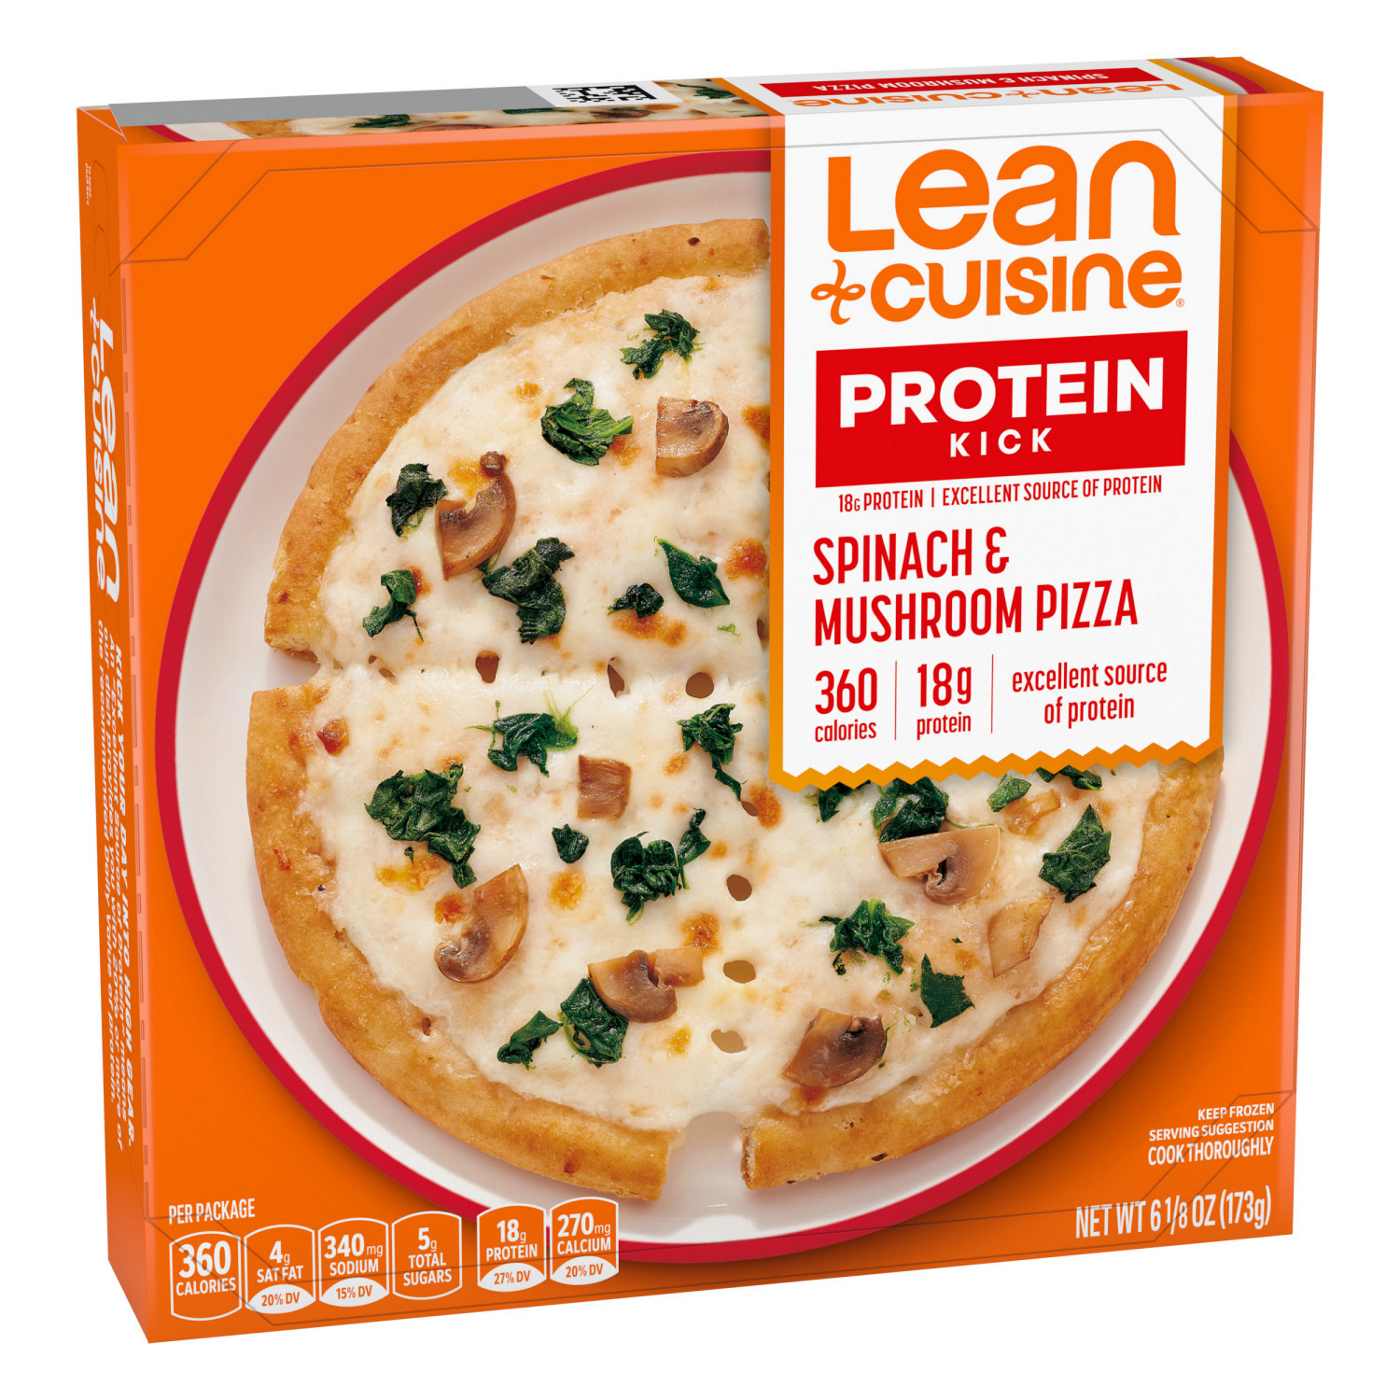 Lean Cuisine 18g Protein Frozen Pizza - Spinach & Mushroom; image 5 of 7